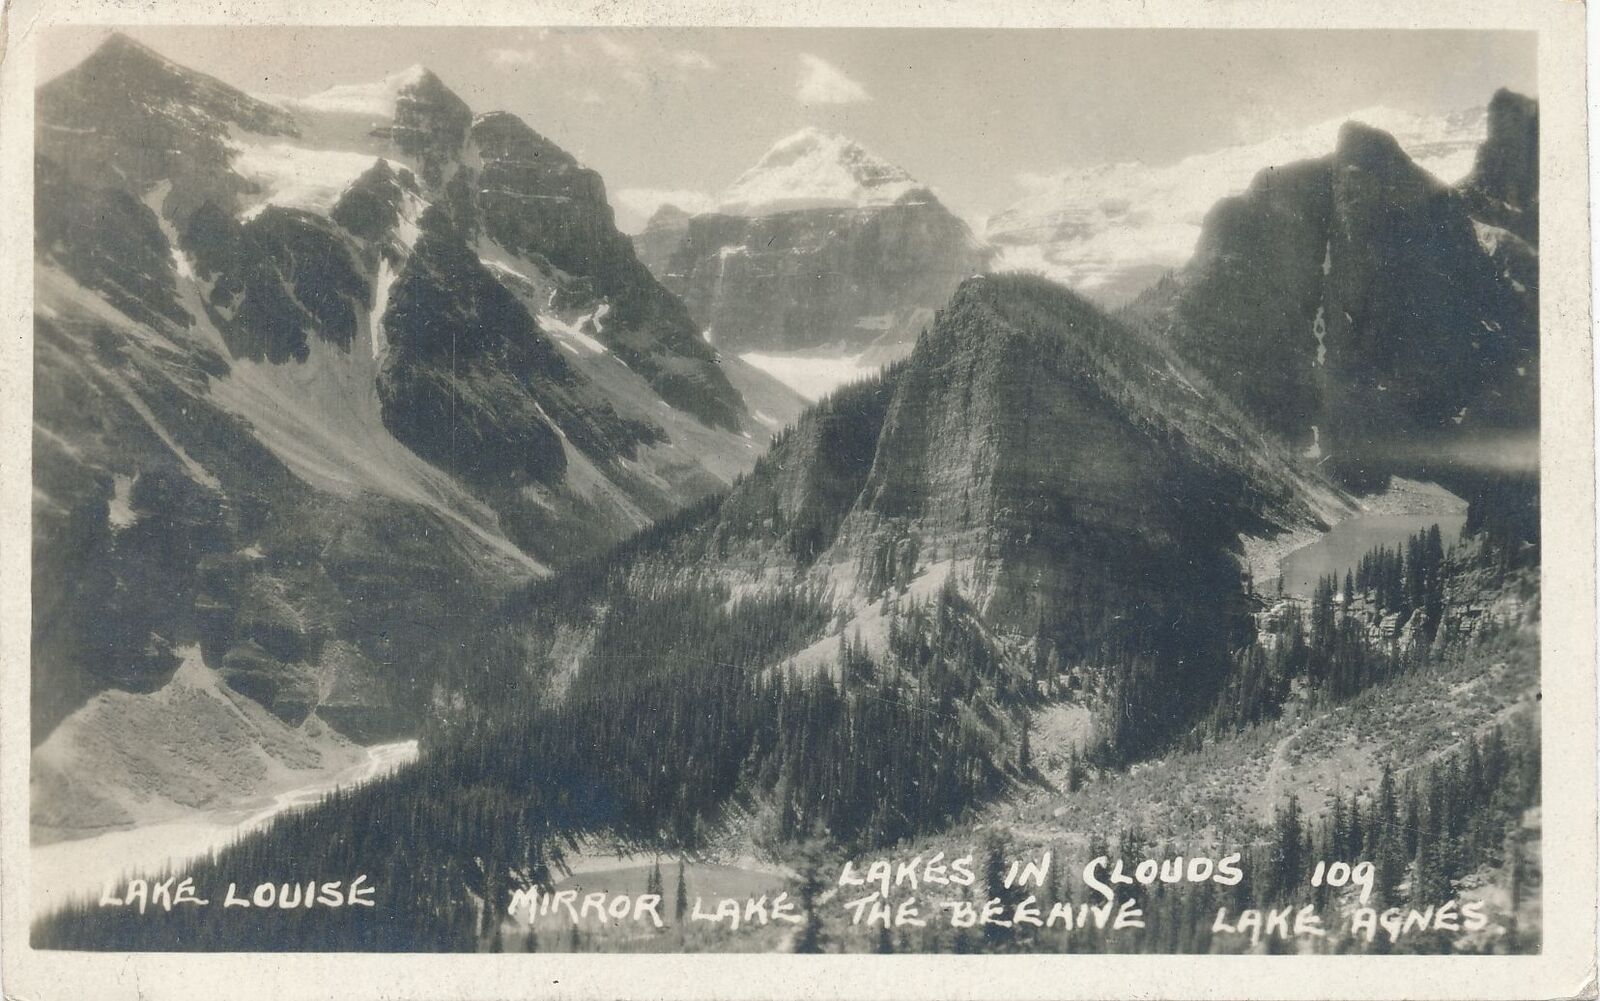 LAKE LOUISE AB - Lakes In Clouds Real Photo Postcard rppc